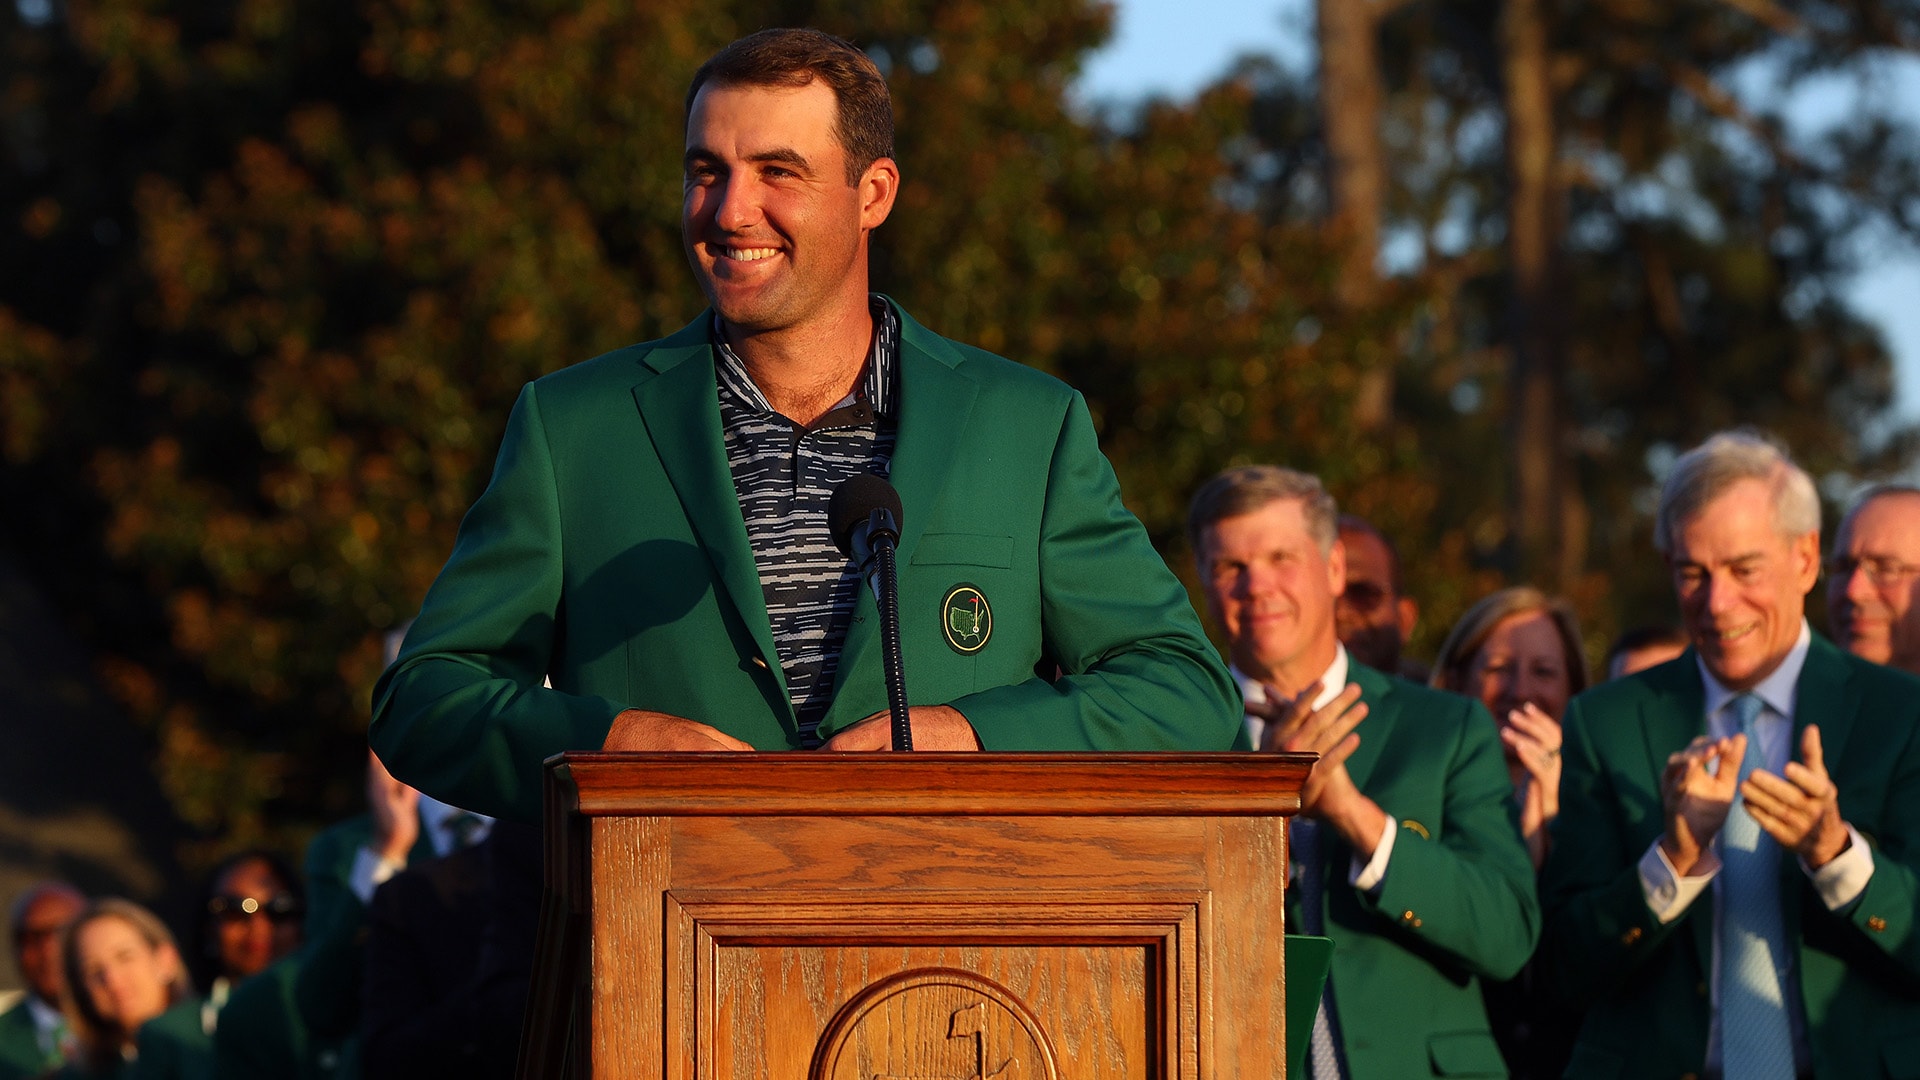 Scottie Scheffler jokes that he’ll have a ‘separate table’ for Bubba Watson at Champs dinner